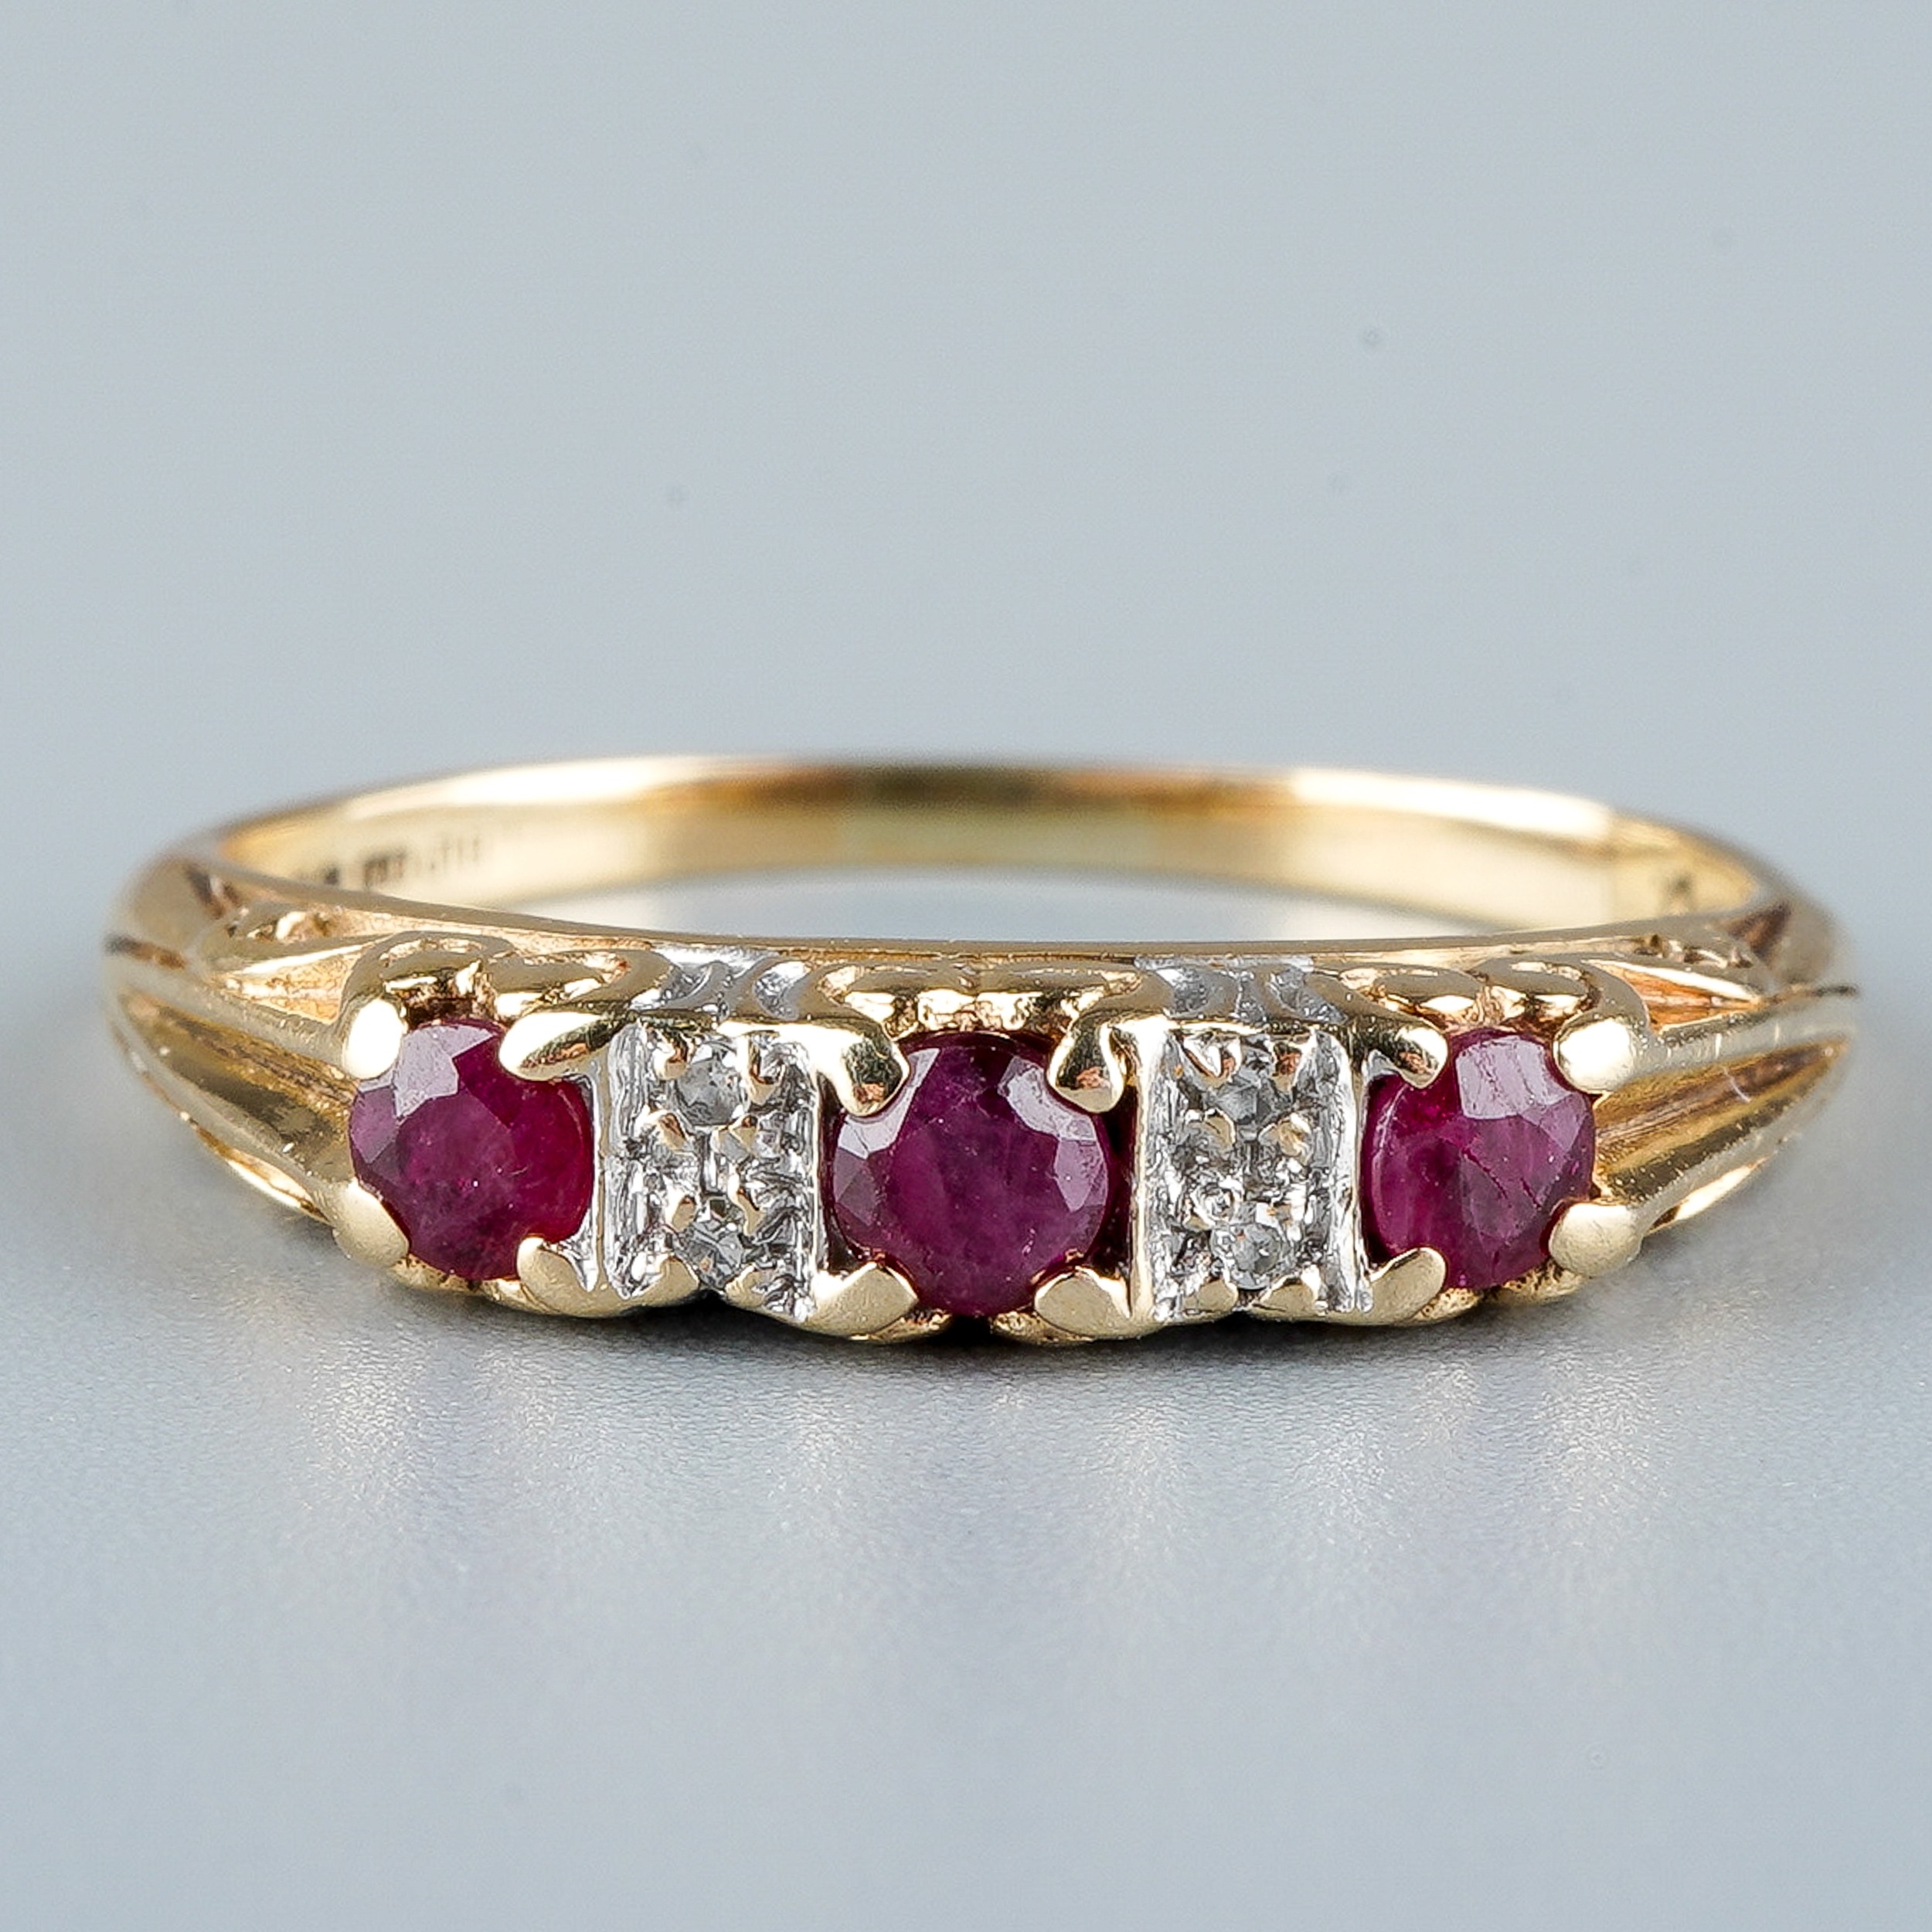 A 9ct yellow gold ruby and diamond ring, set with three round-cut rubies with diamond-chip